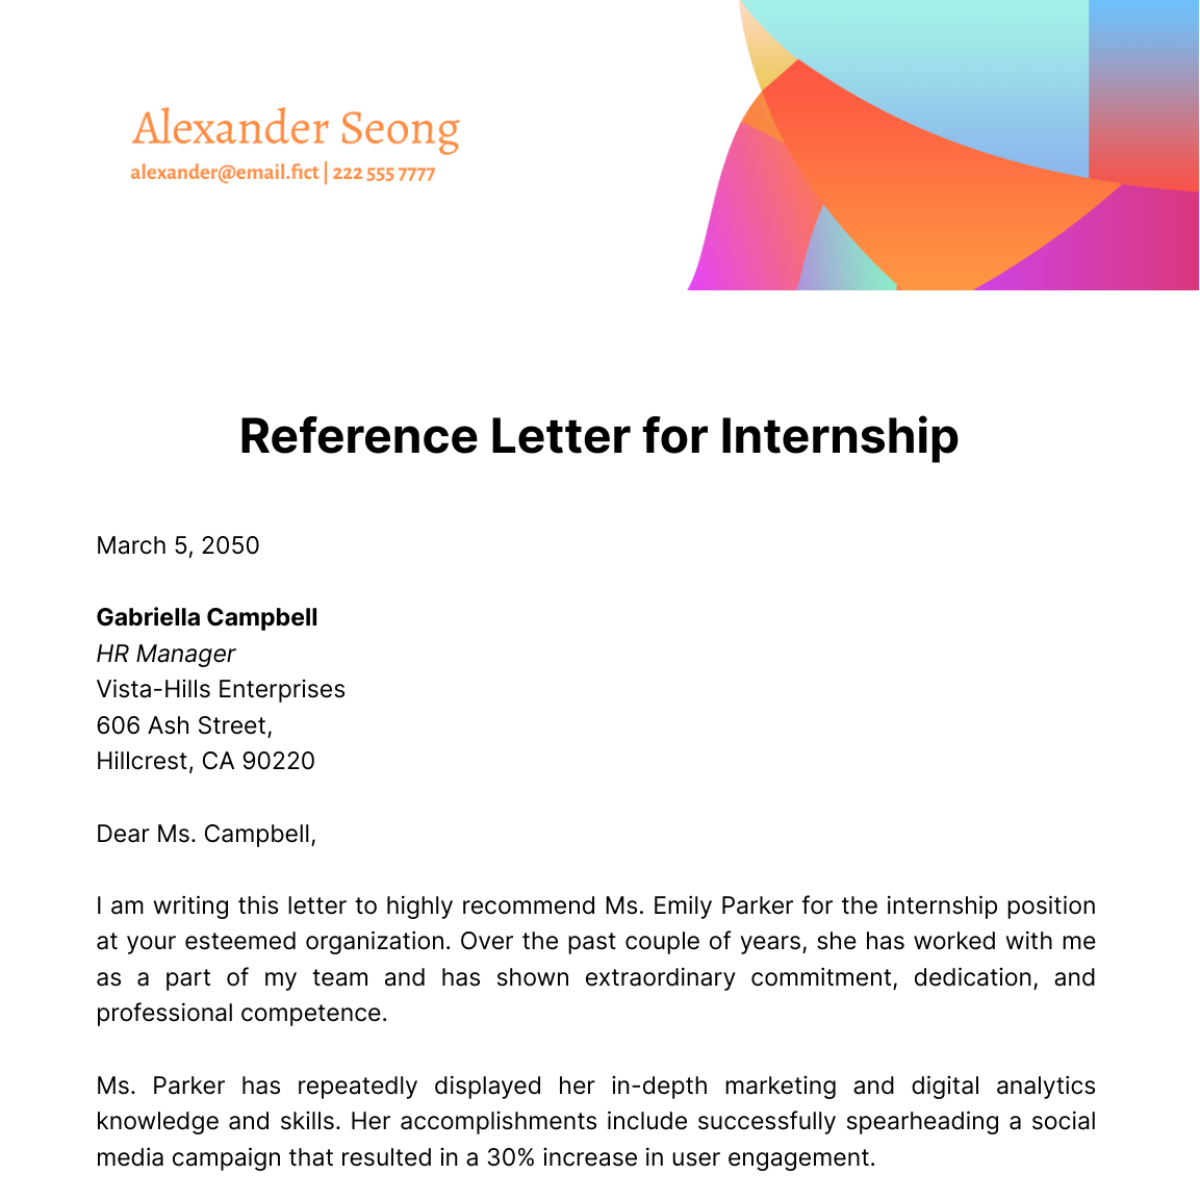 Reference Letter for Internship Template